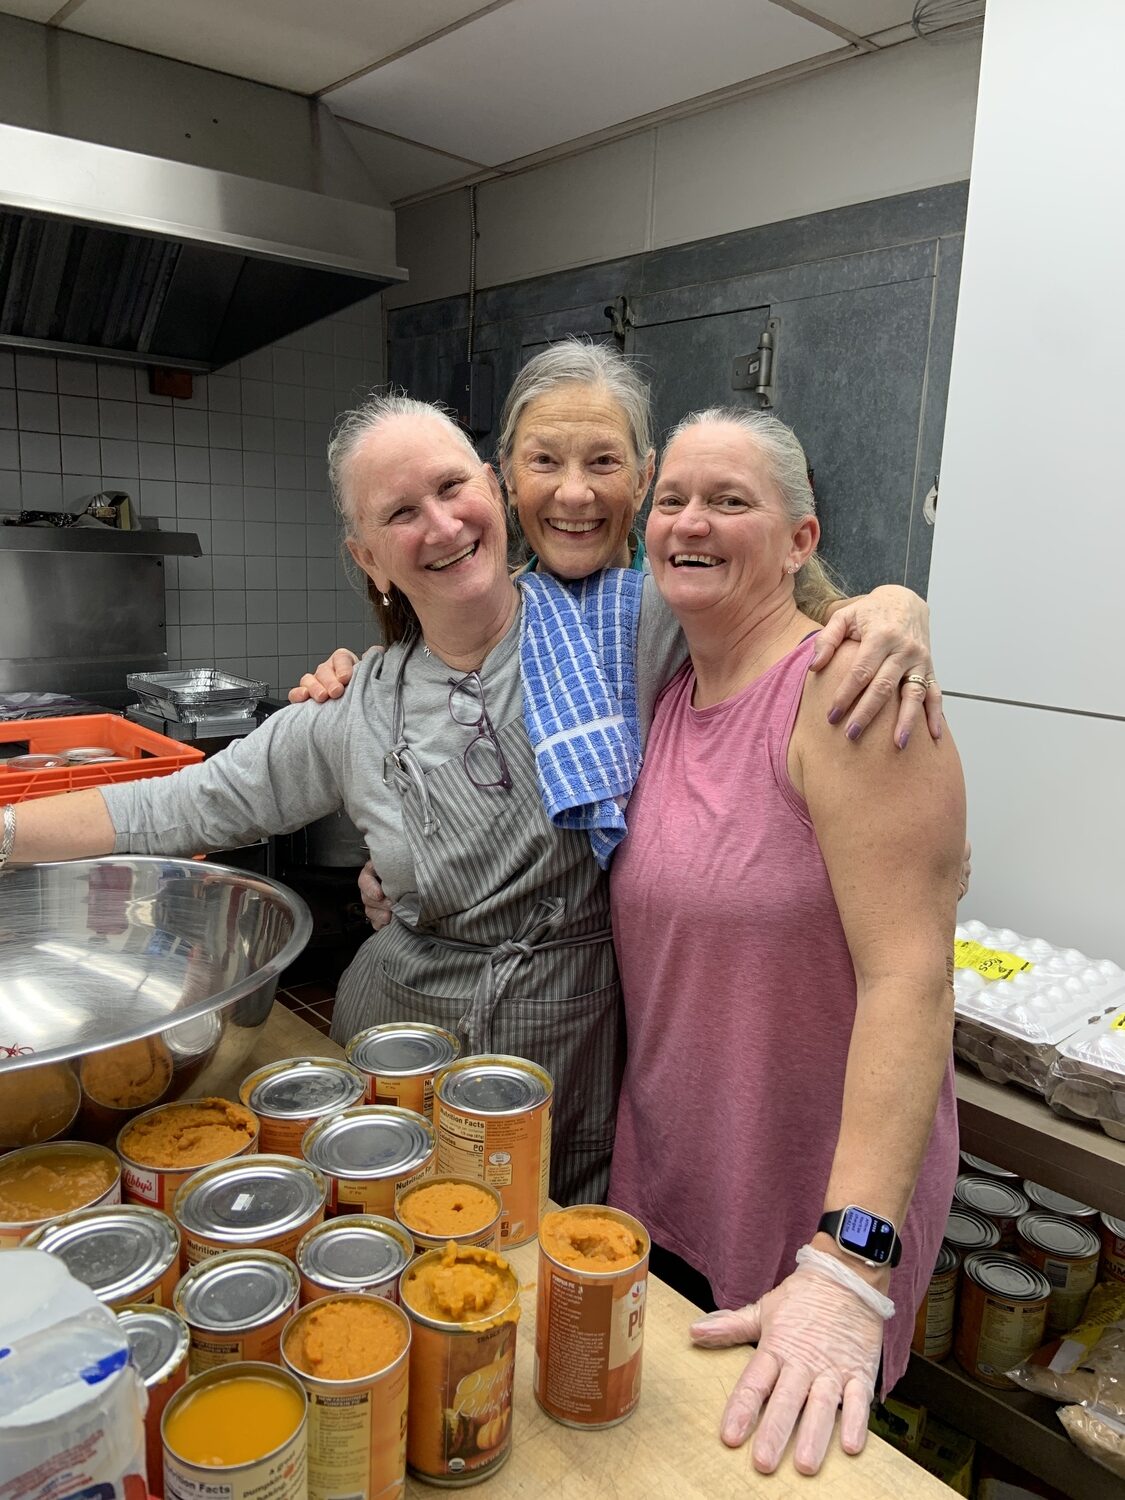 Rhodi Winchell, from left, Cheryl Rozzi, and Fran Nill midway through the first day's preparation and baking. STEPHEN J. KOTZ